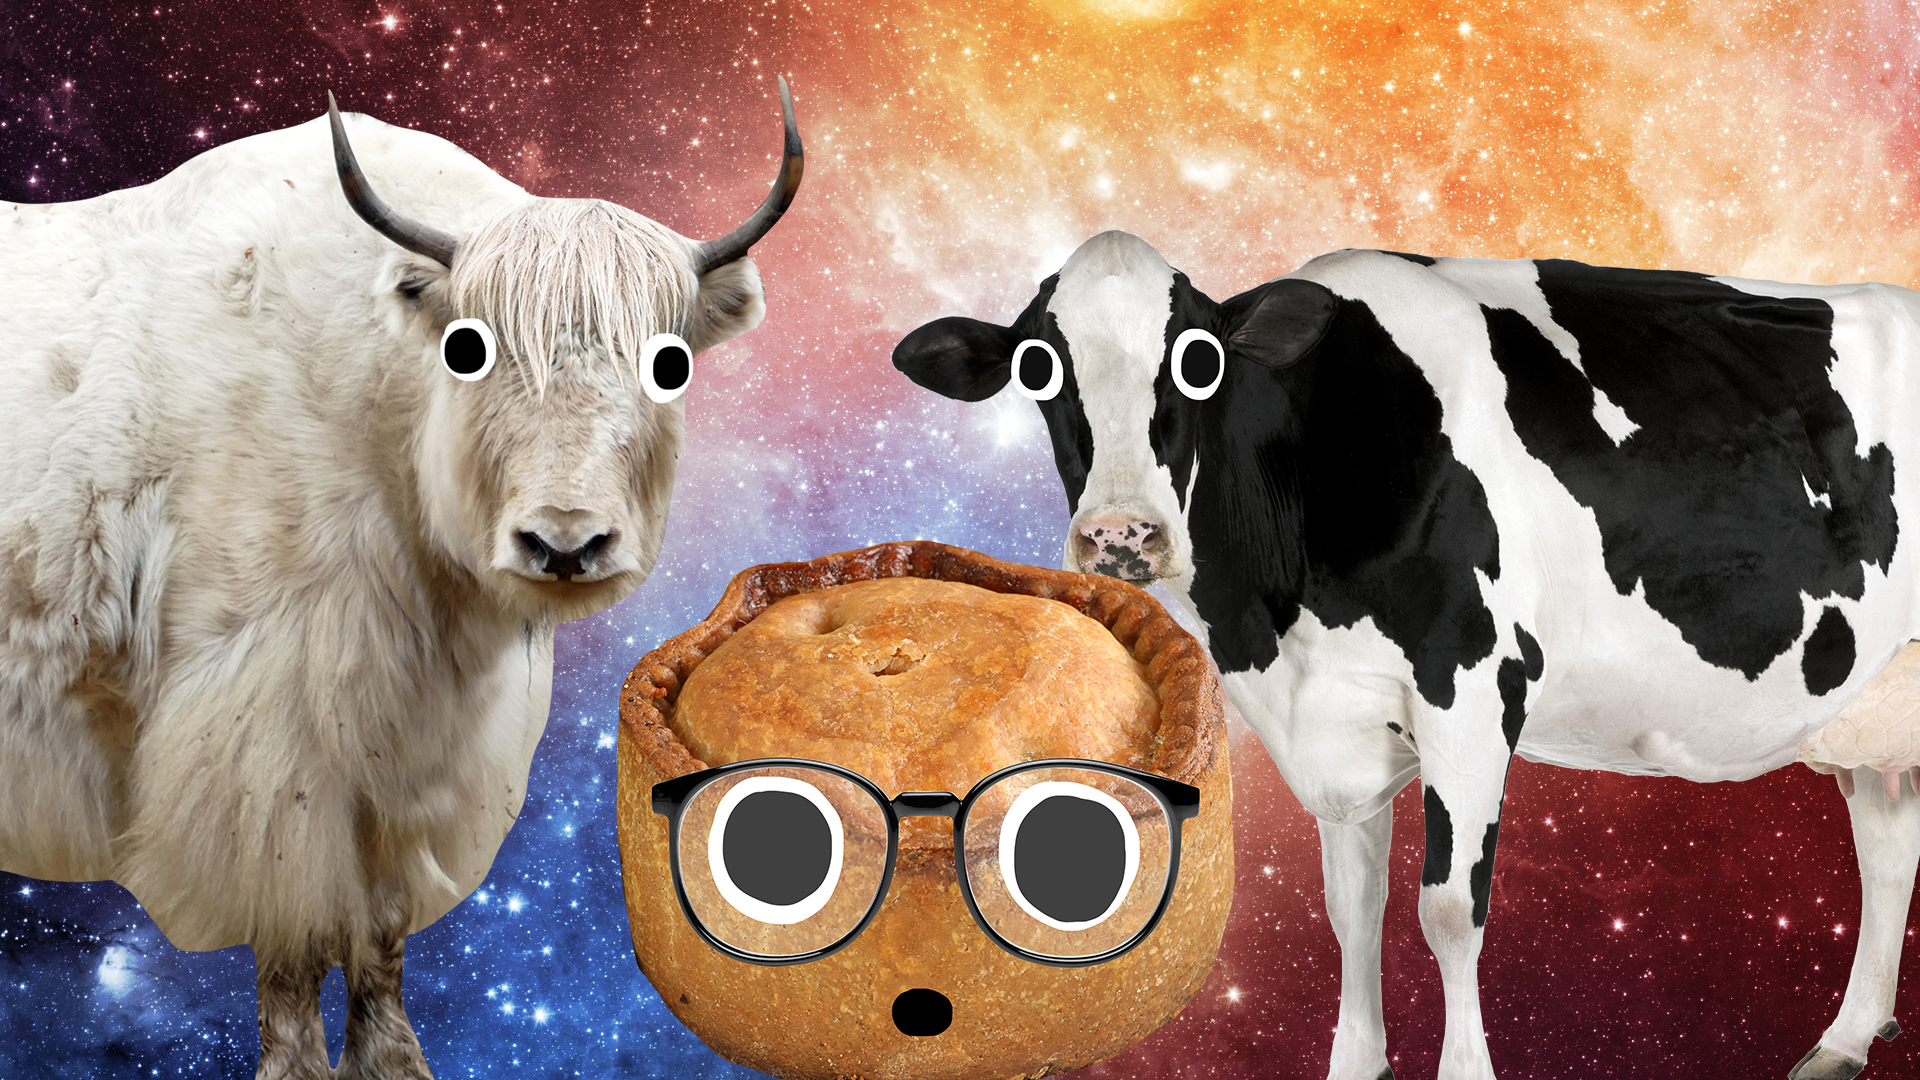 Beano animals and pie on space background